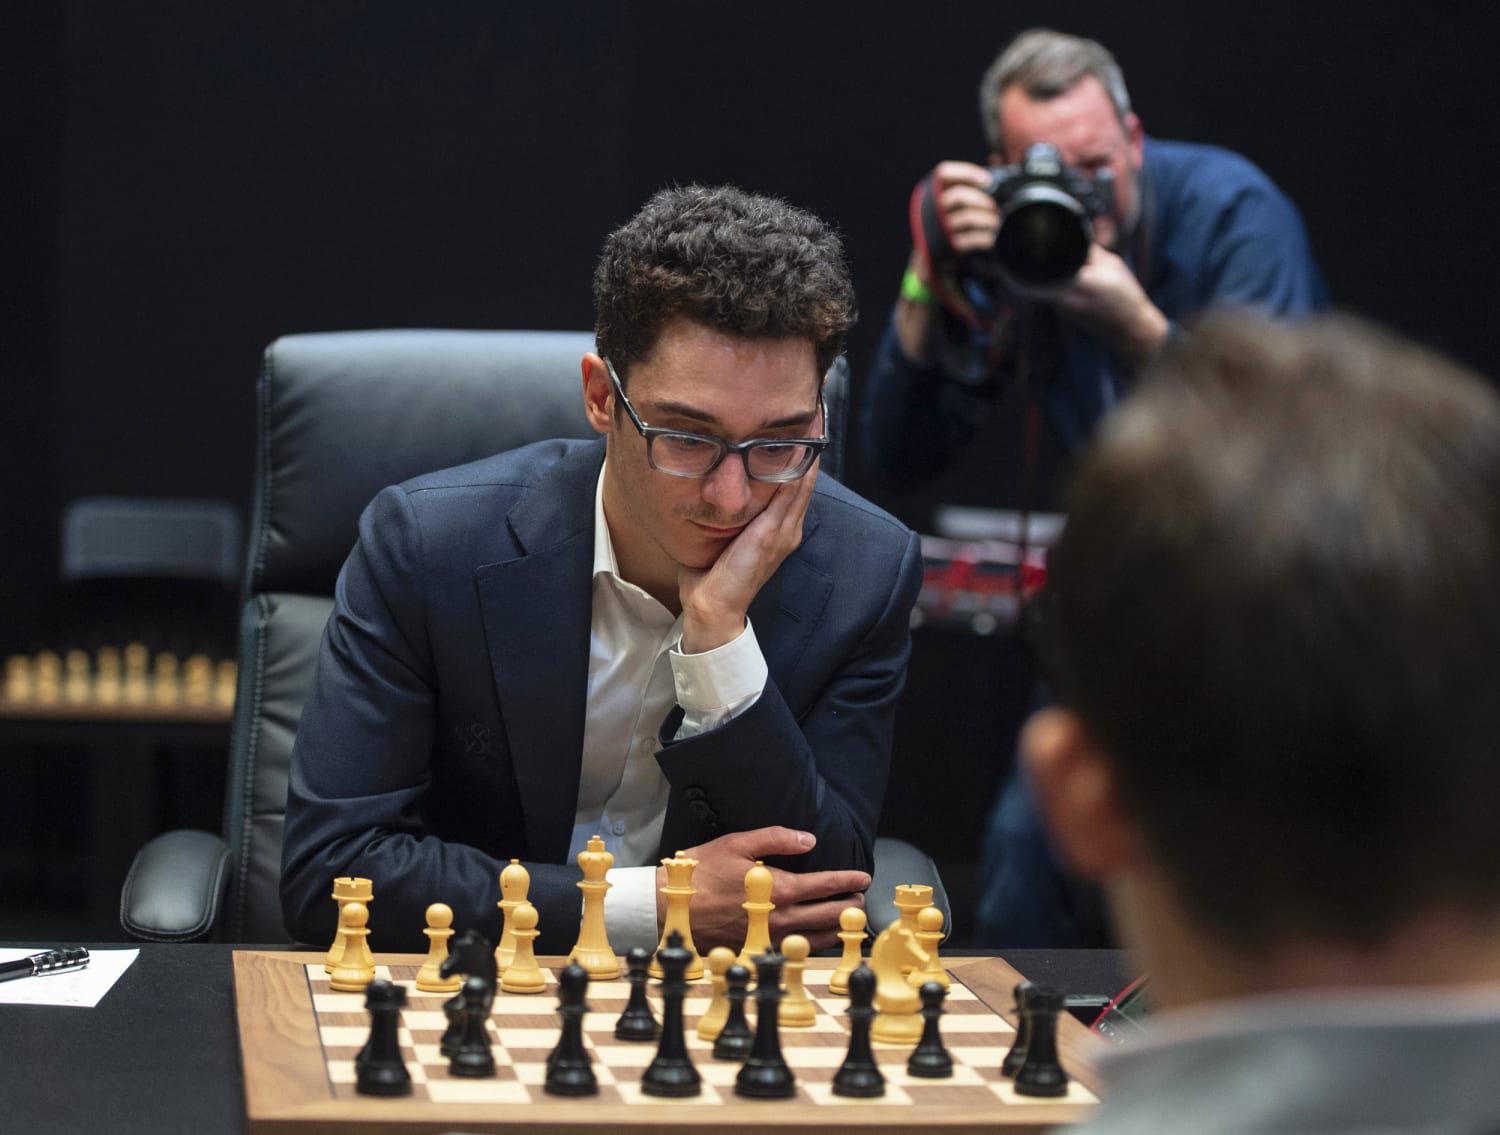 Chessable Masters quarterfinals: Carlsen savages Caruana